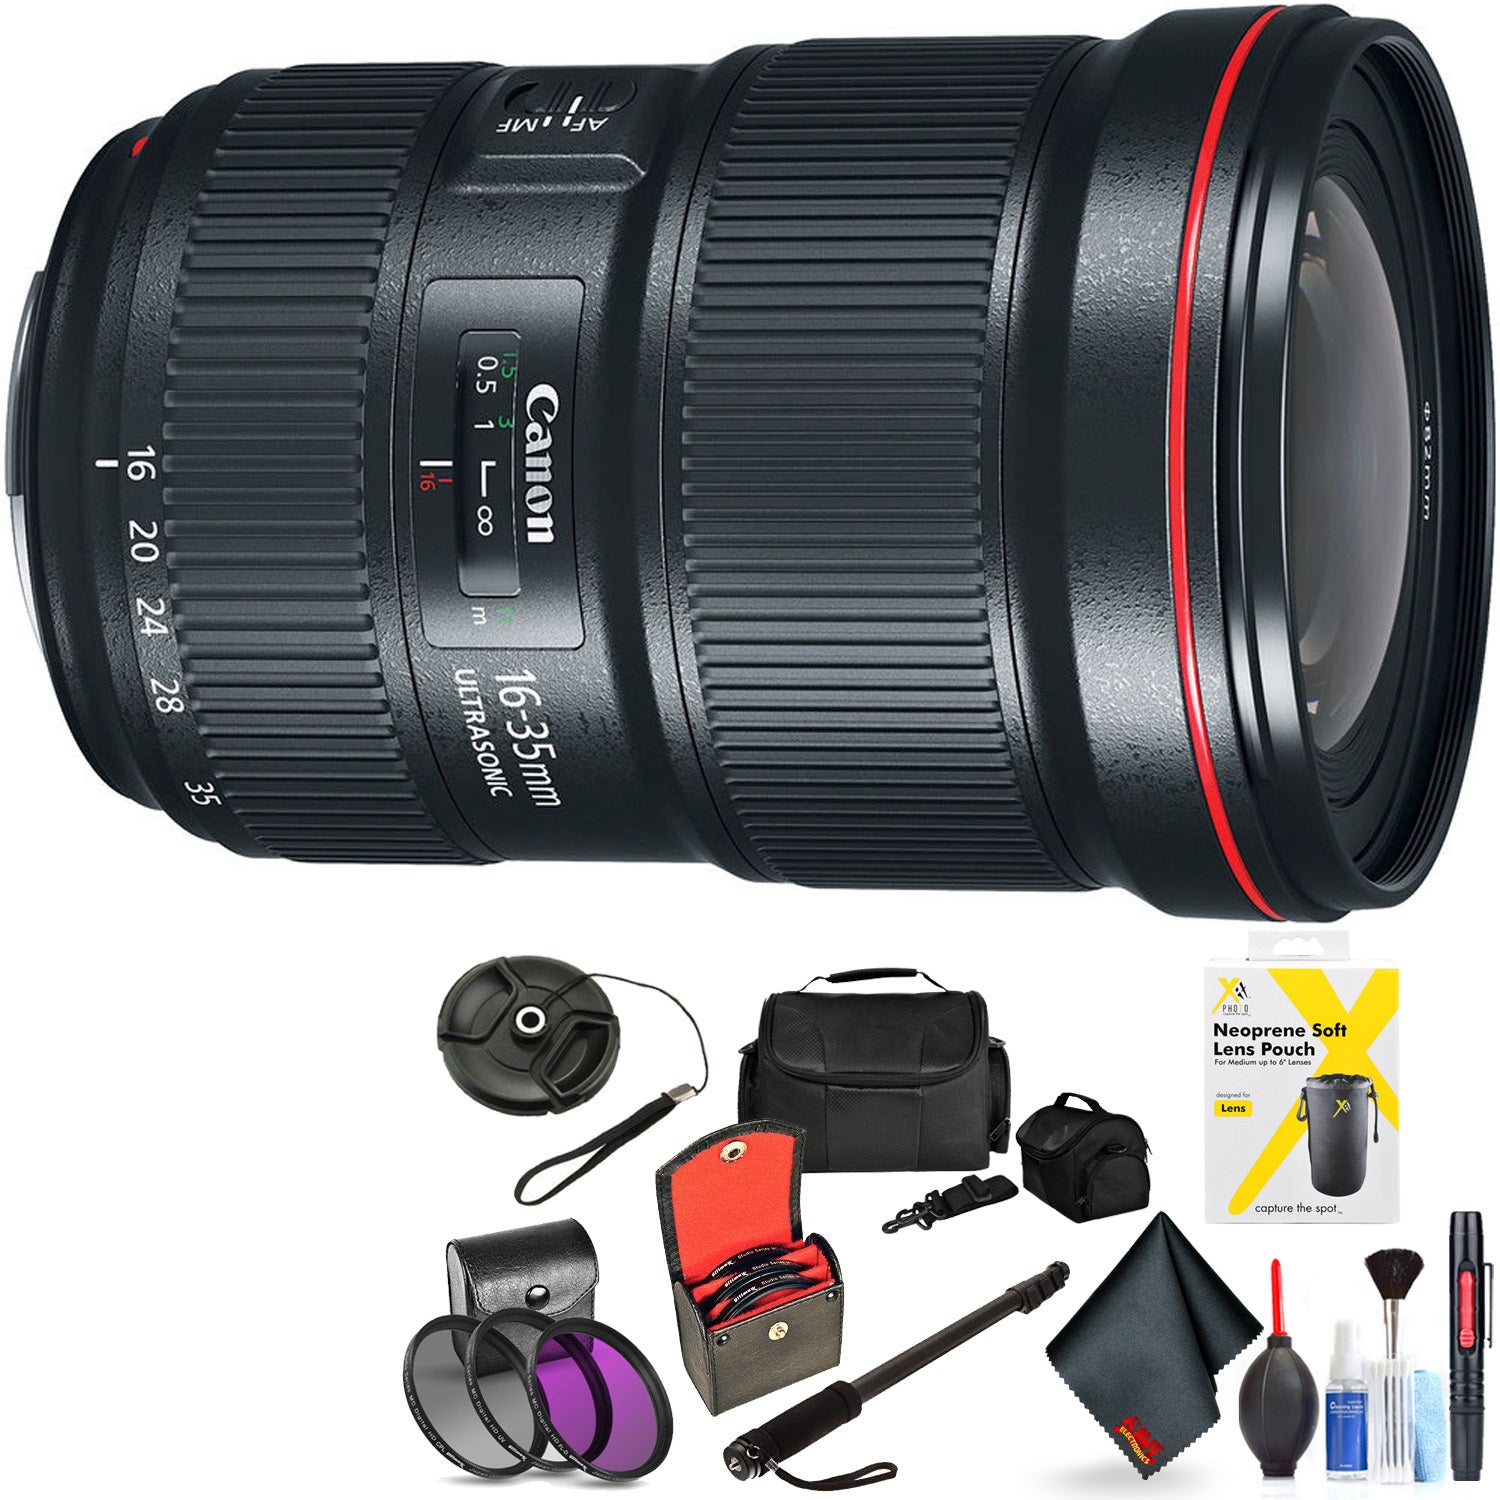 Canon EF 16-35mm F/2.8L Iii USM Lens for Canon 6D, 5D Mark IV, 5D Mark III, 5D Mark II, 6D Mark II, 5Dsr, 5Ds, 1Dx, 1Dx